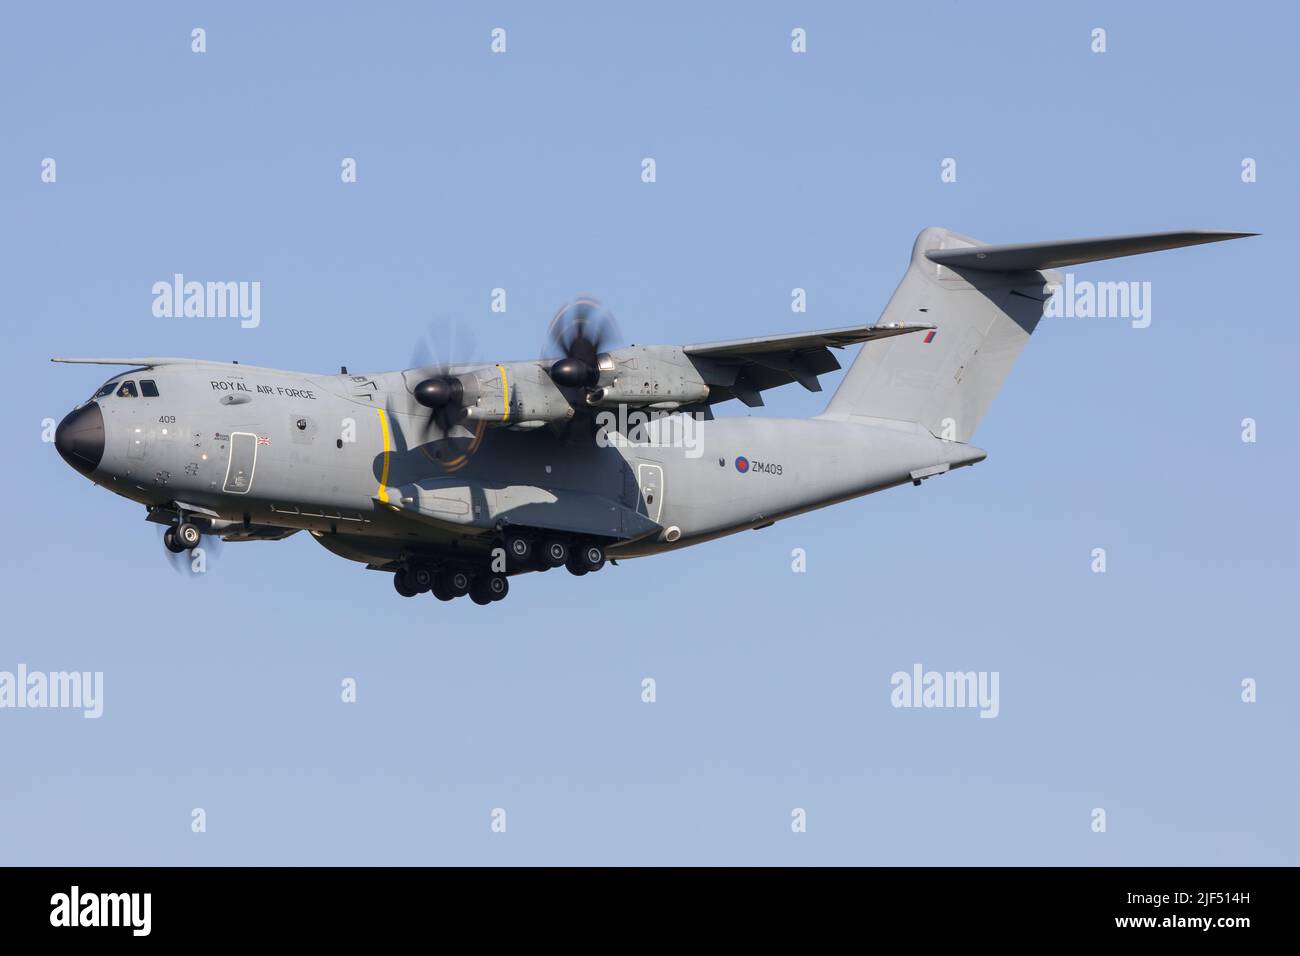 A Royal Air Force Airbus A400M military cargo aircraft landing in Graz in Austria in front of blue skies Stock Photo